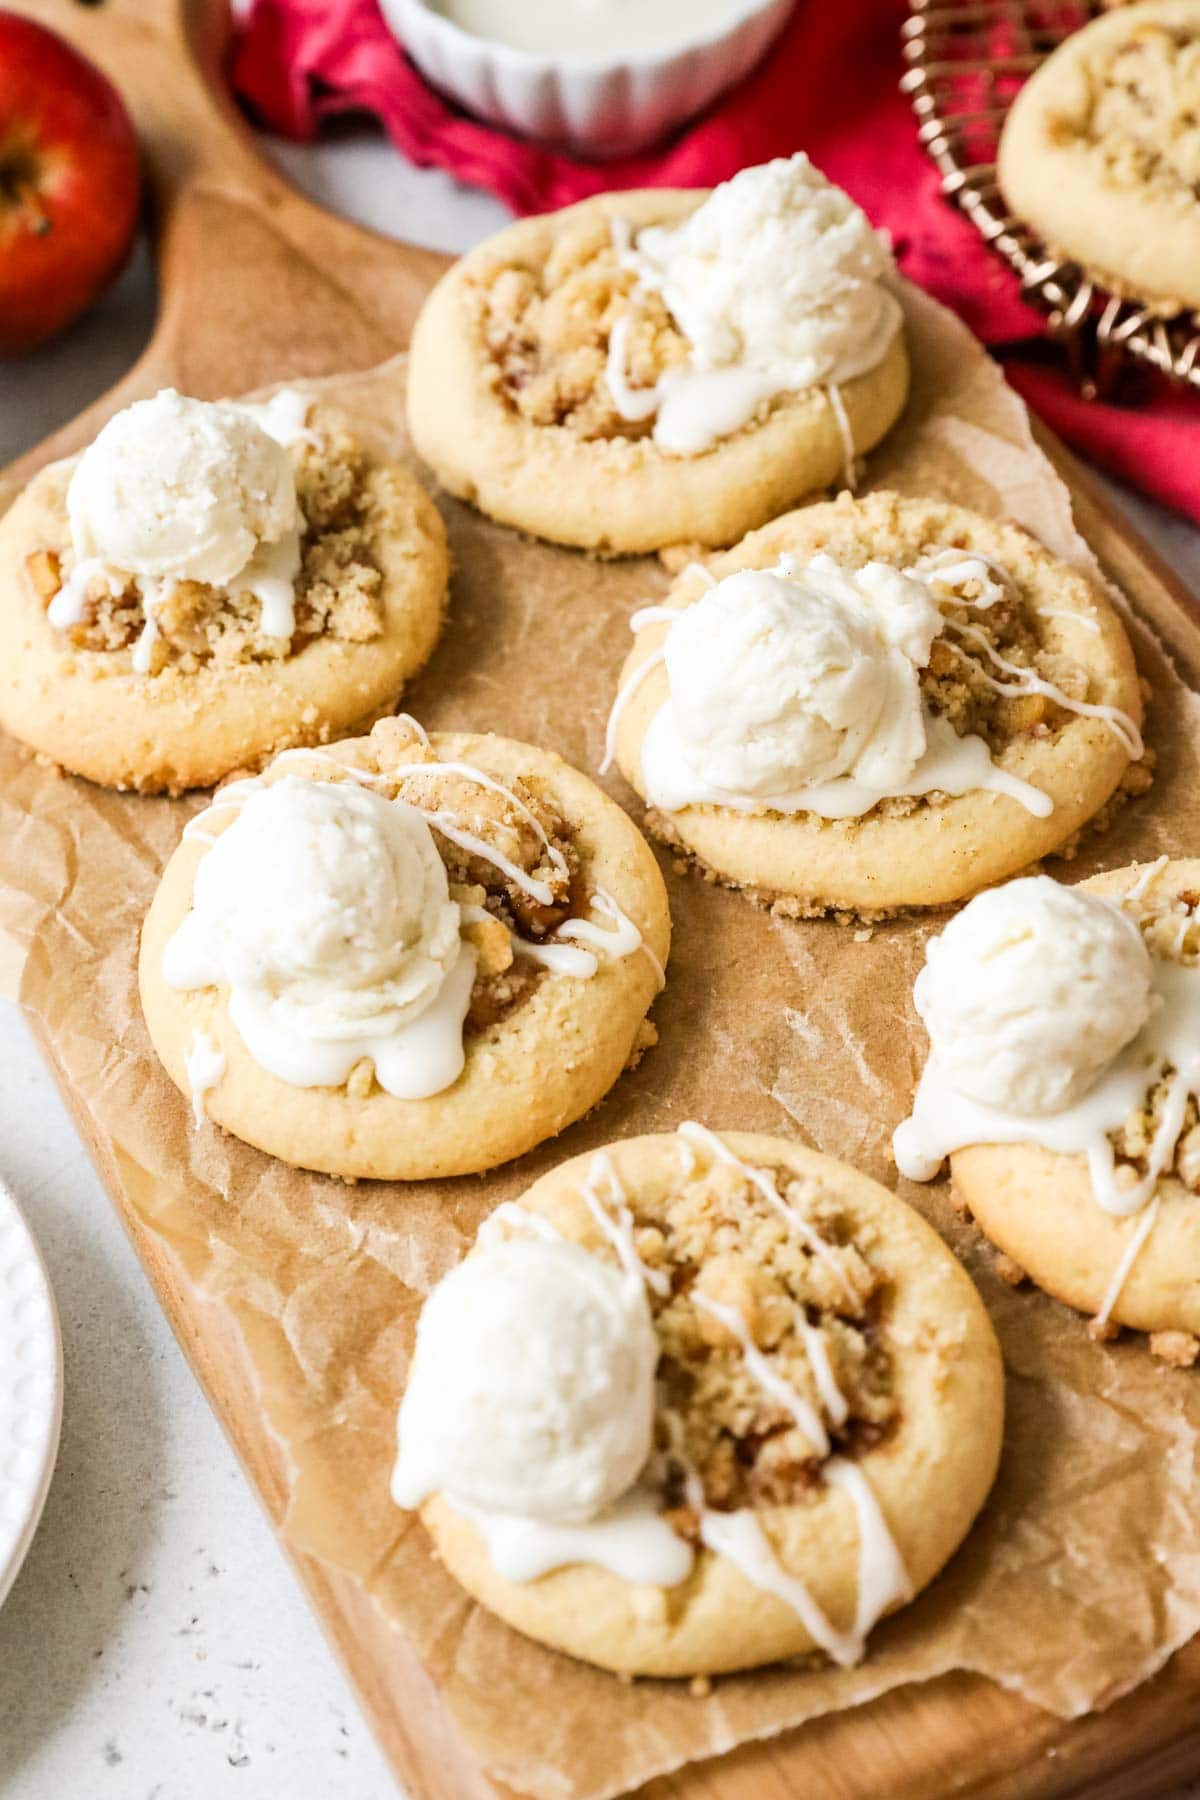 Overhead view of six cookies topped with baked apples, streusel, vanilla glaze, and a scoop of buttercream "ice cream" on a wood cutting board.